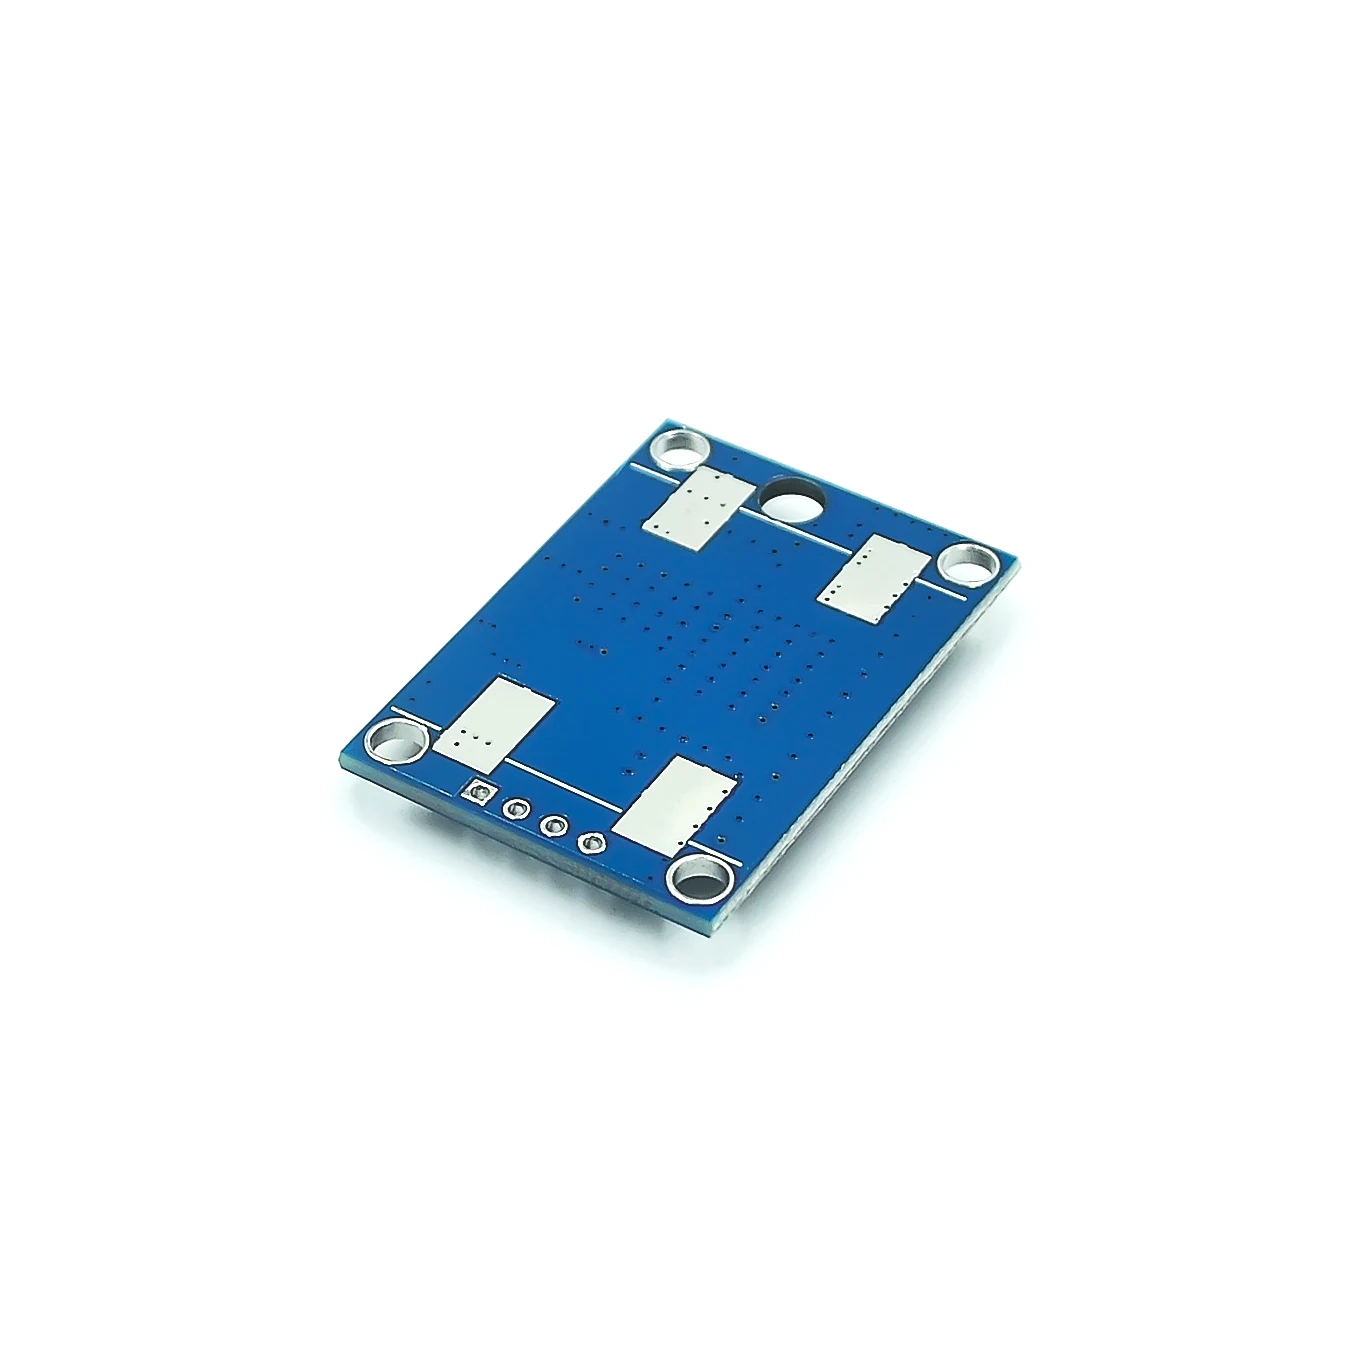 

10pcs GY-NEO6MV2 NEO-6M 7M 8M GPS Module NEO6MV2 with Flight Control EEPROM MWC APM2.5 large antenna for Arduino